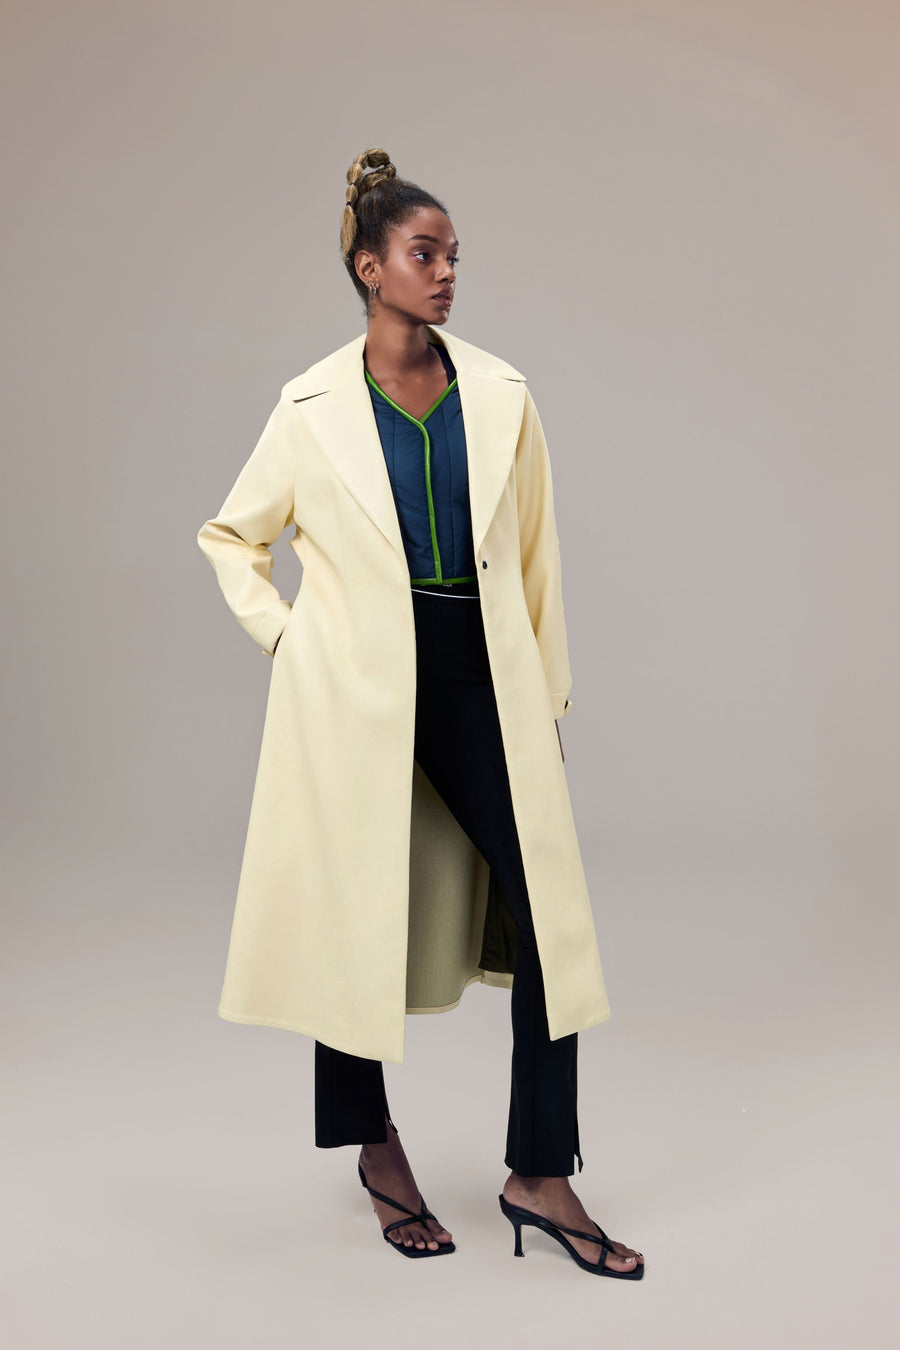 Miller Waterproof Sustainable Vegan Leather Trench with Flared Skirt